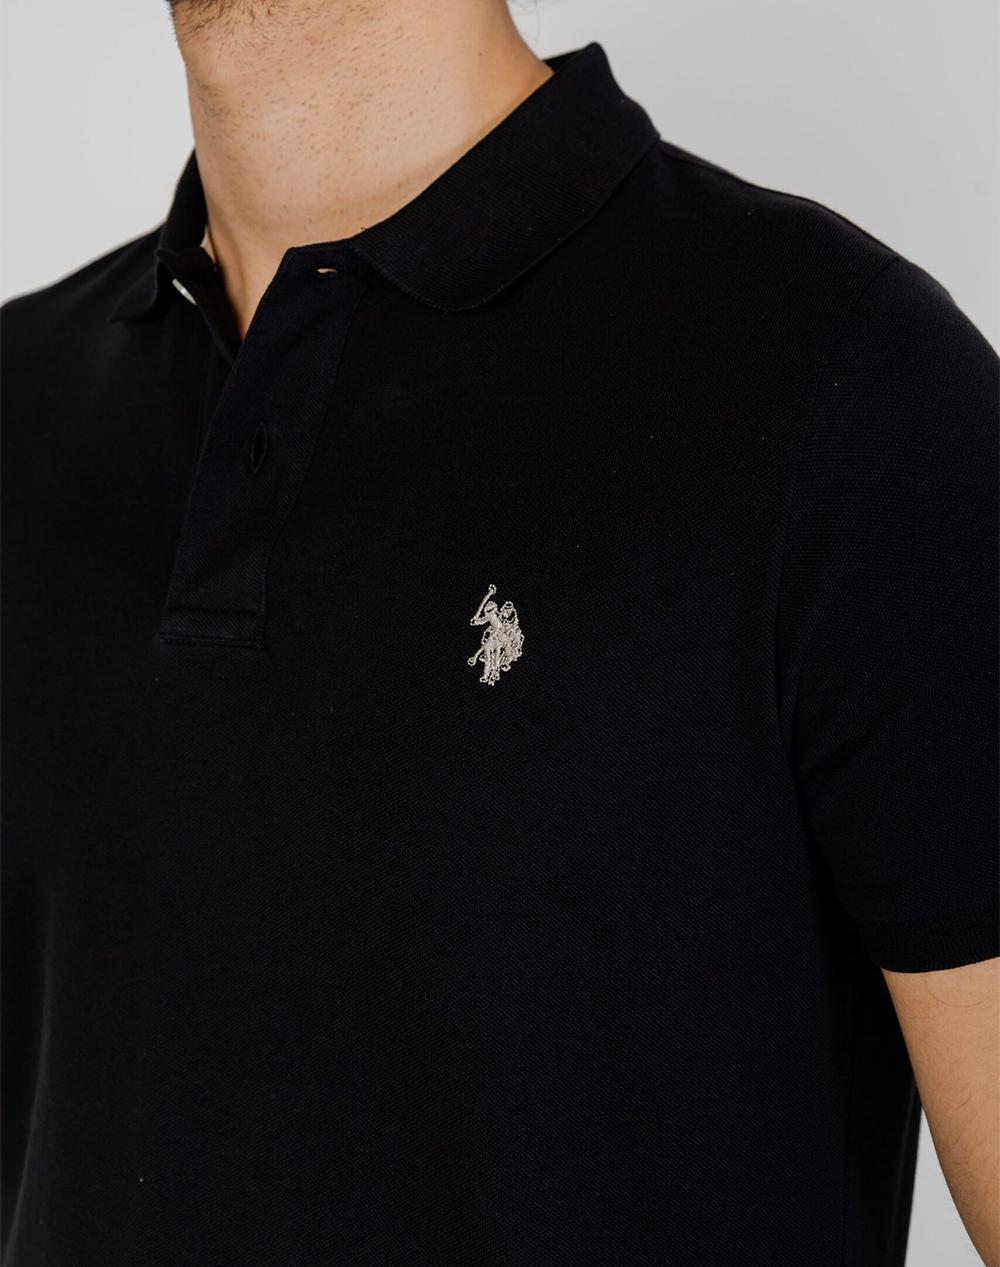 US POLO ASSN KING 41029 EHPD POLO PACK OF 400 MENS SHIRT